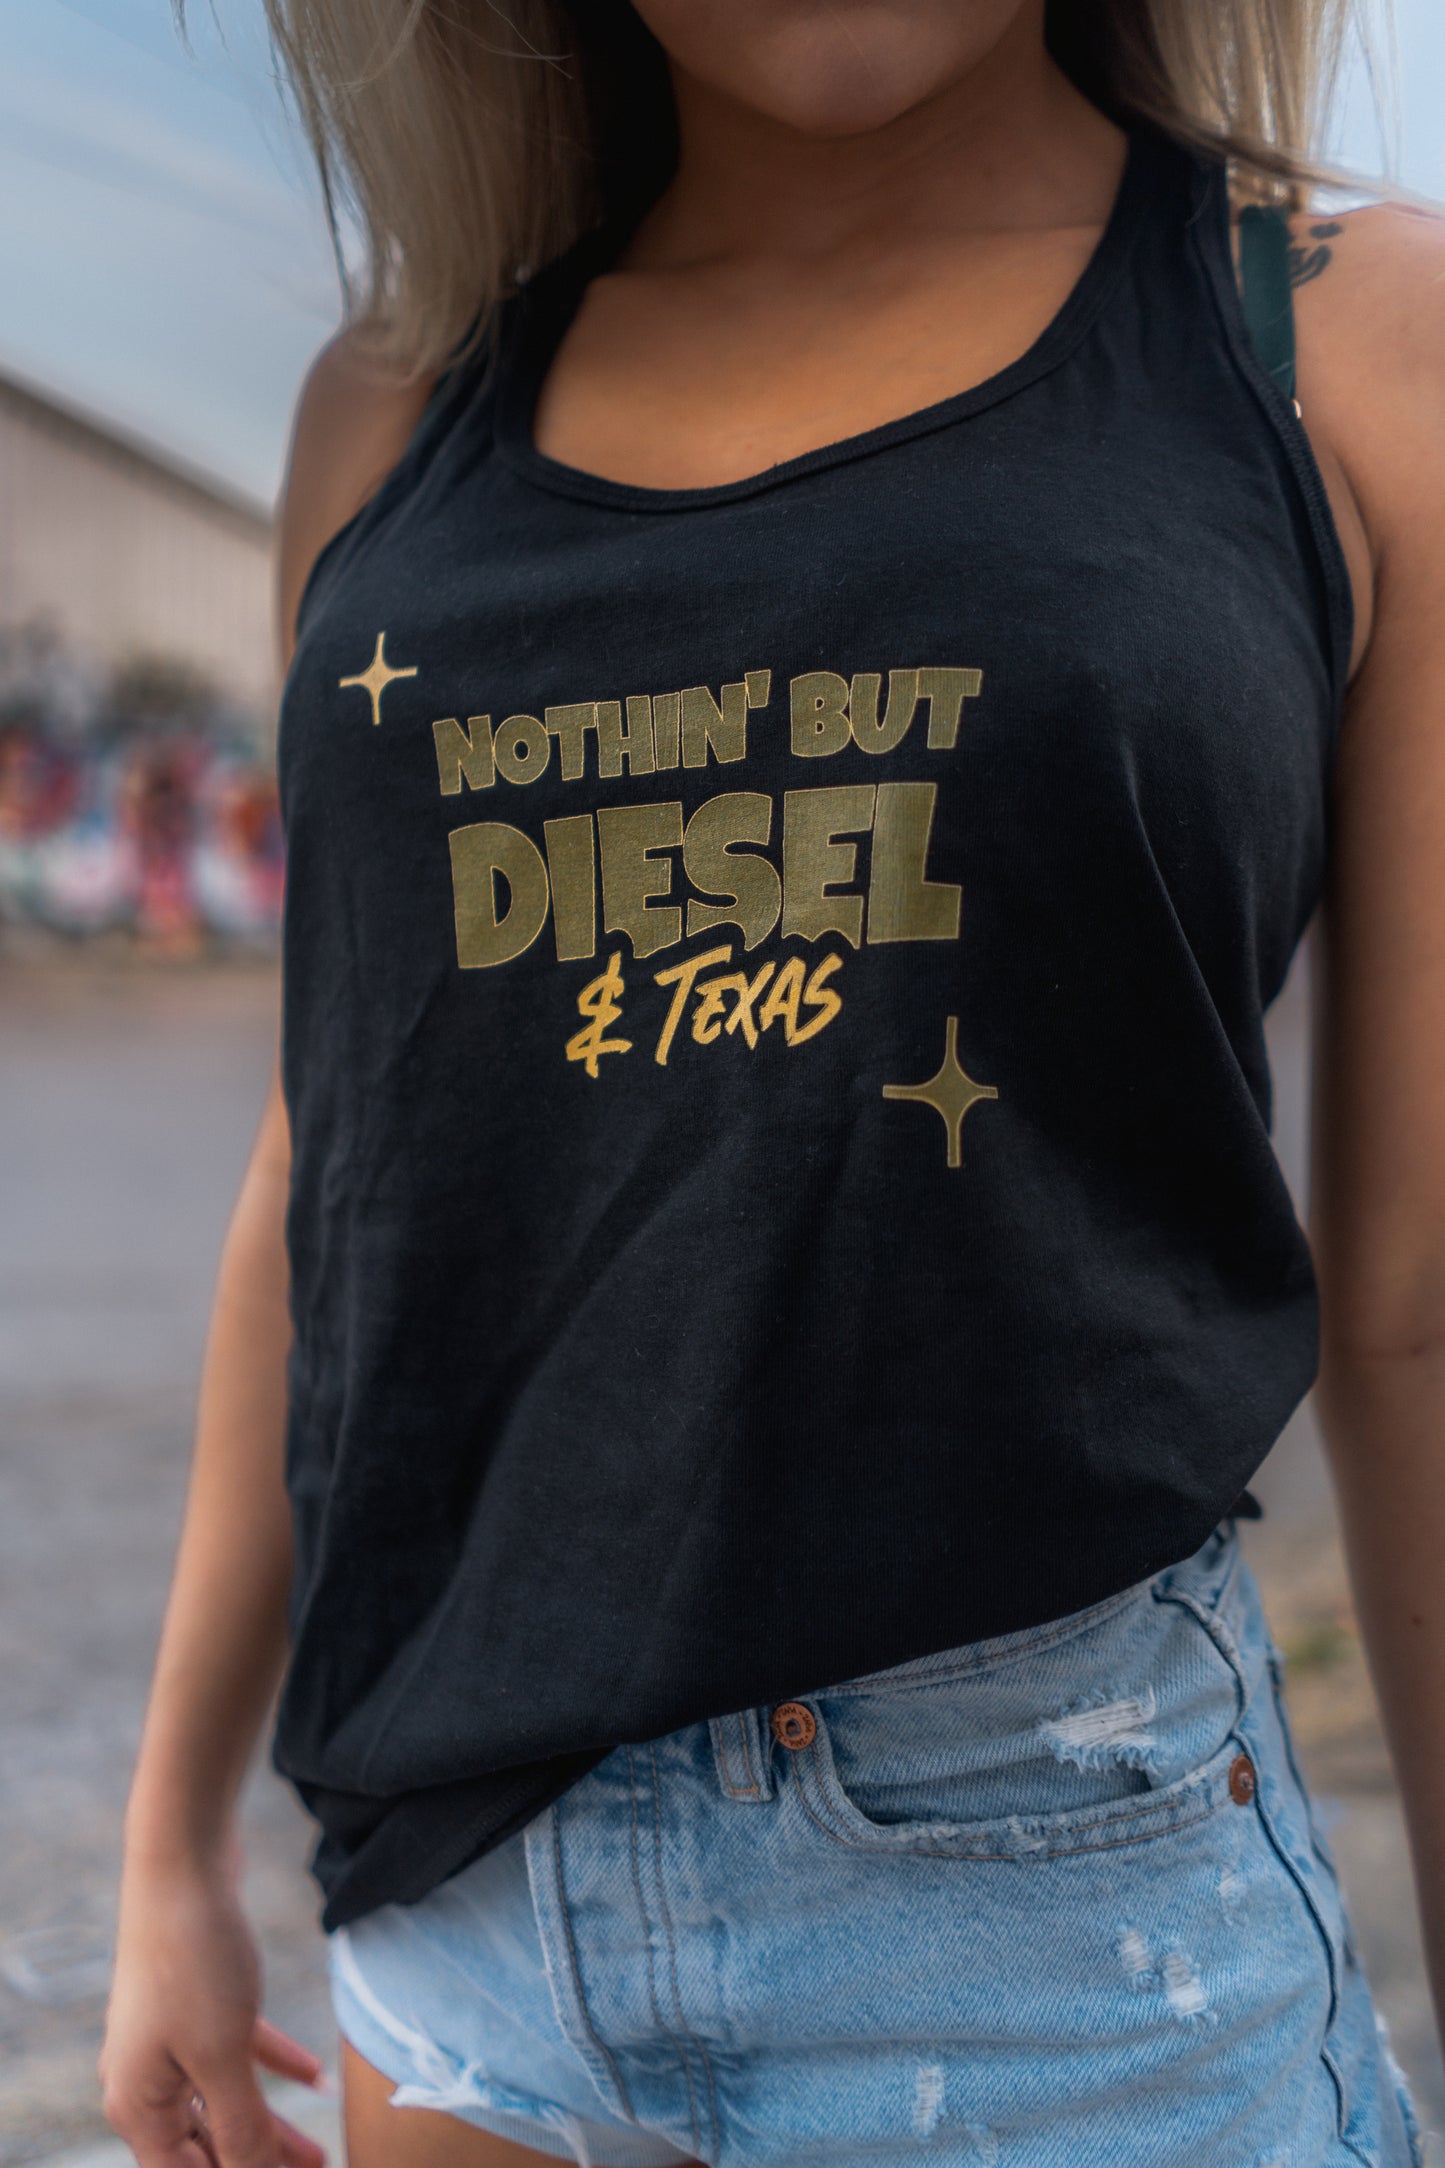 Nothin' but Diesel and Texas